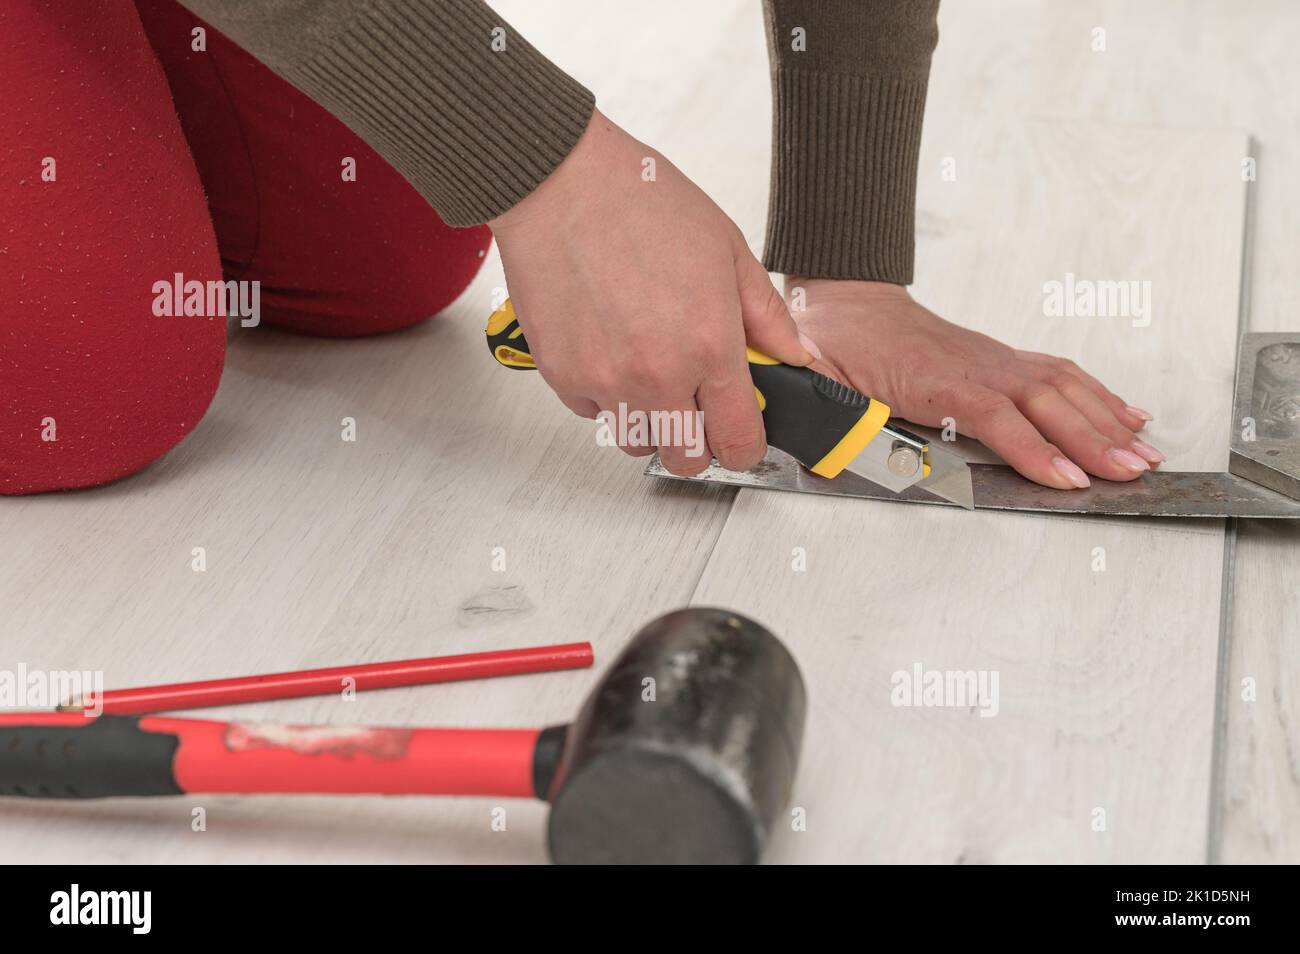 Female master cuts quartz vinyl floor with a stationery knife, floor installation, woman performs repair work. Stock Photo